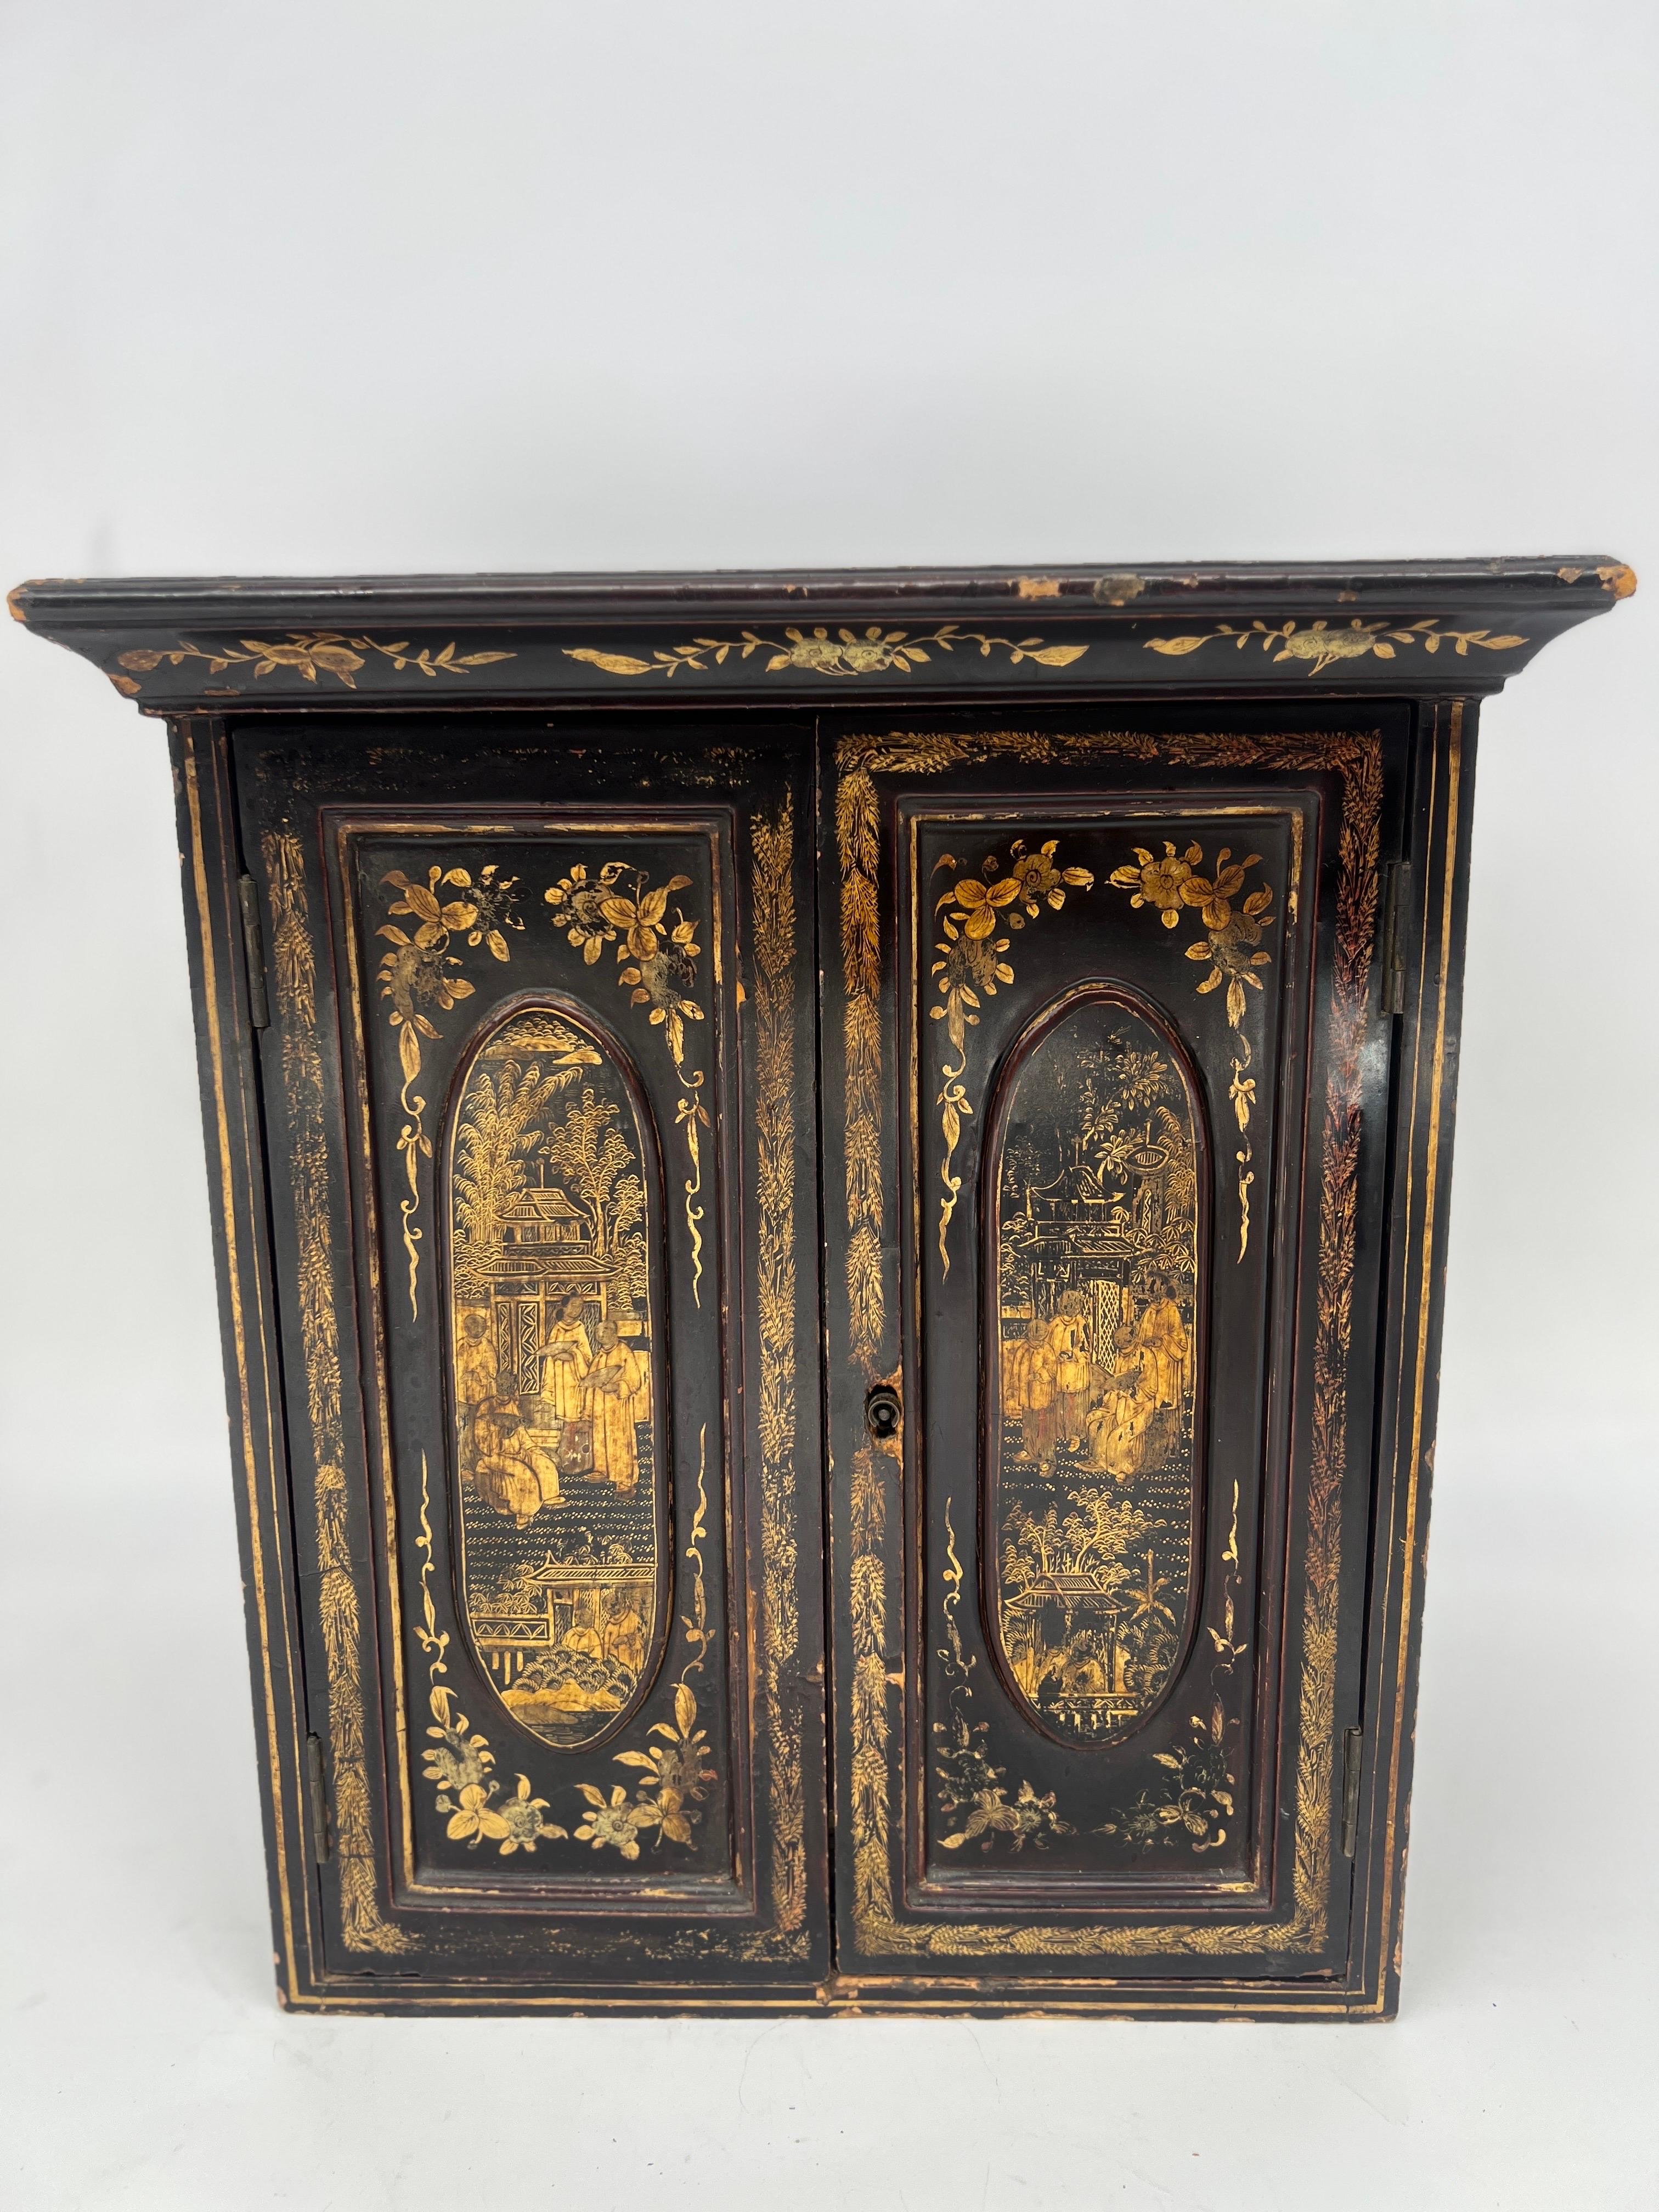 British Antique Chinese Export Chinoiserie Decorated Collector or Jewelry Cabinet